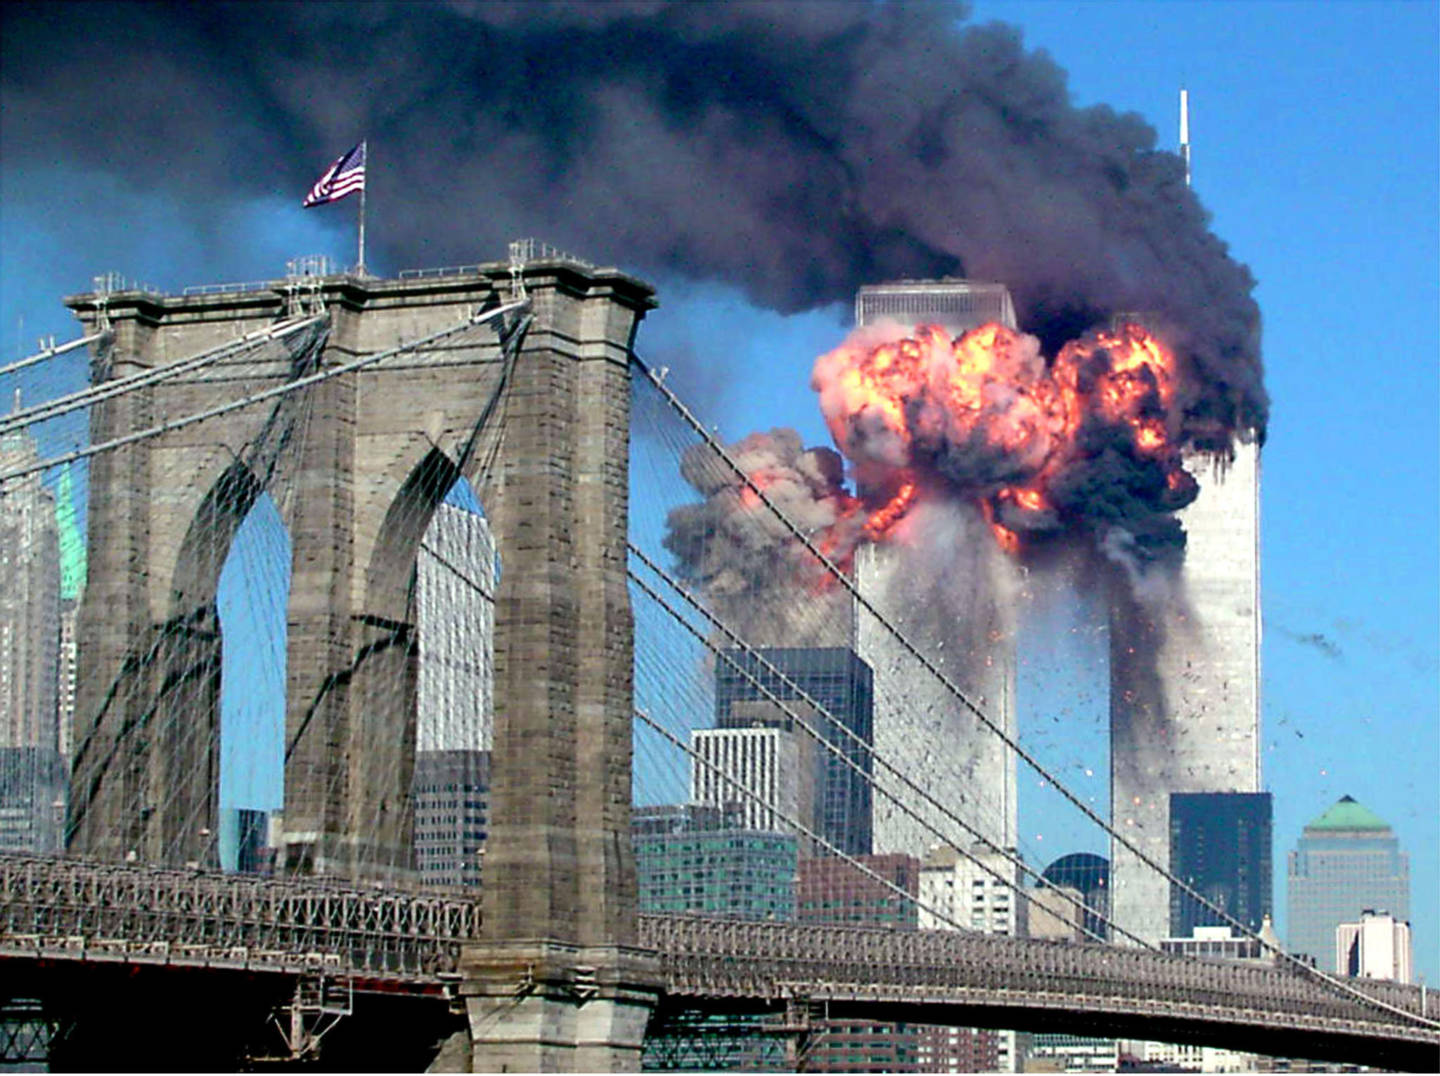 The second tower of the World Trade Center bursts into flames after being hit by a hijacked airplane in New York on September 11, 2001. REUTERS/Sara K. Schwittek